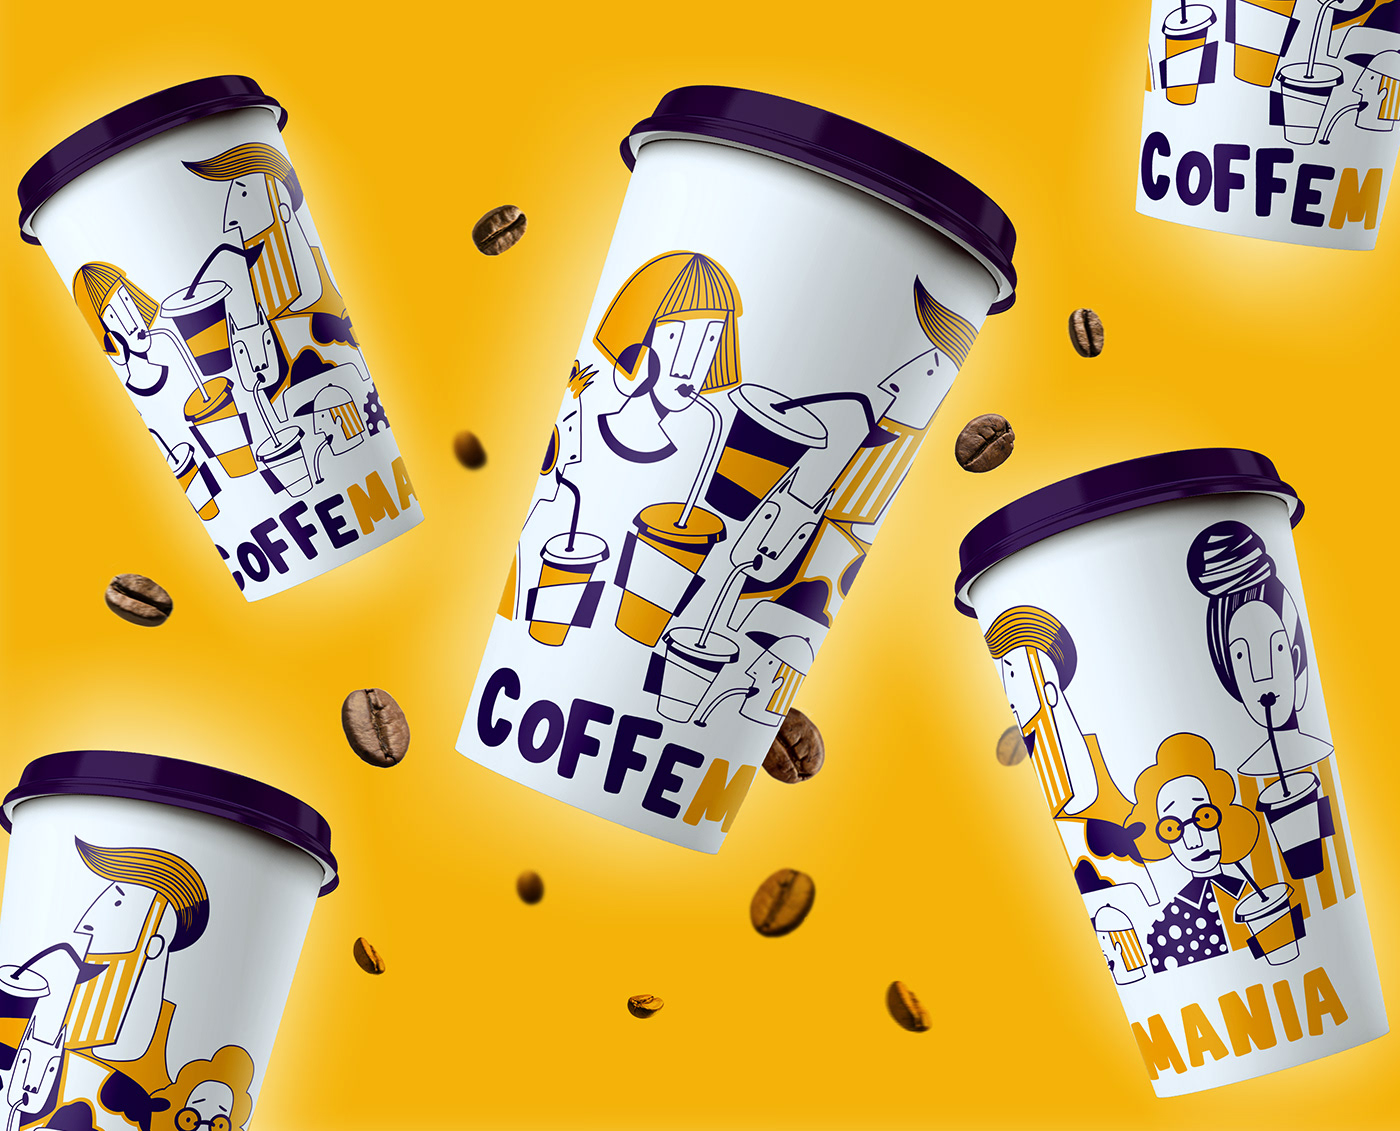 animation  coffe cup design Food  ILLUSTRATION  packaginddesign Packaging trend